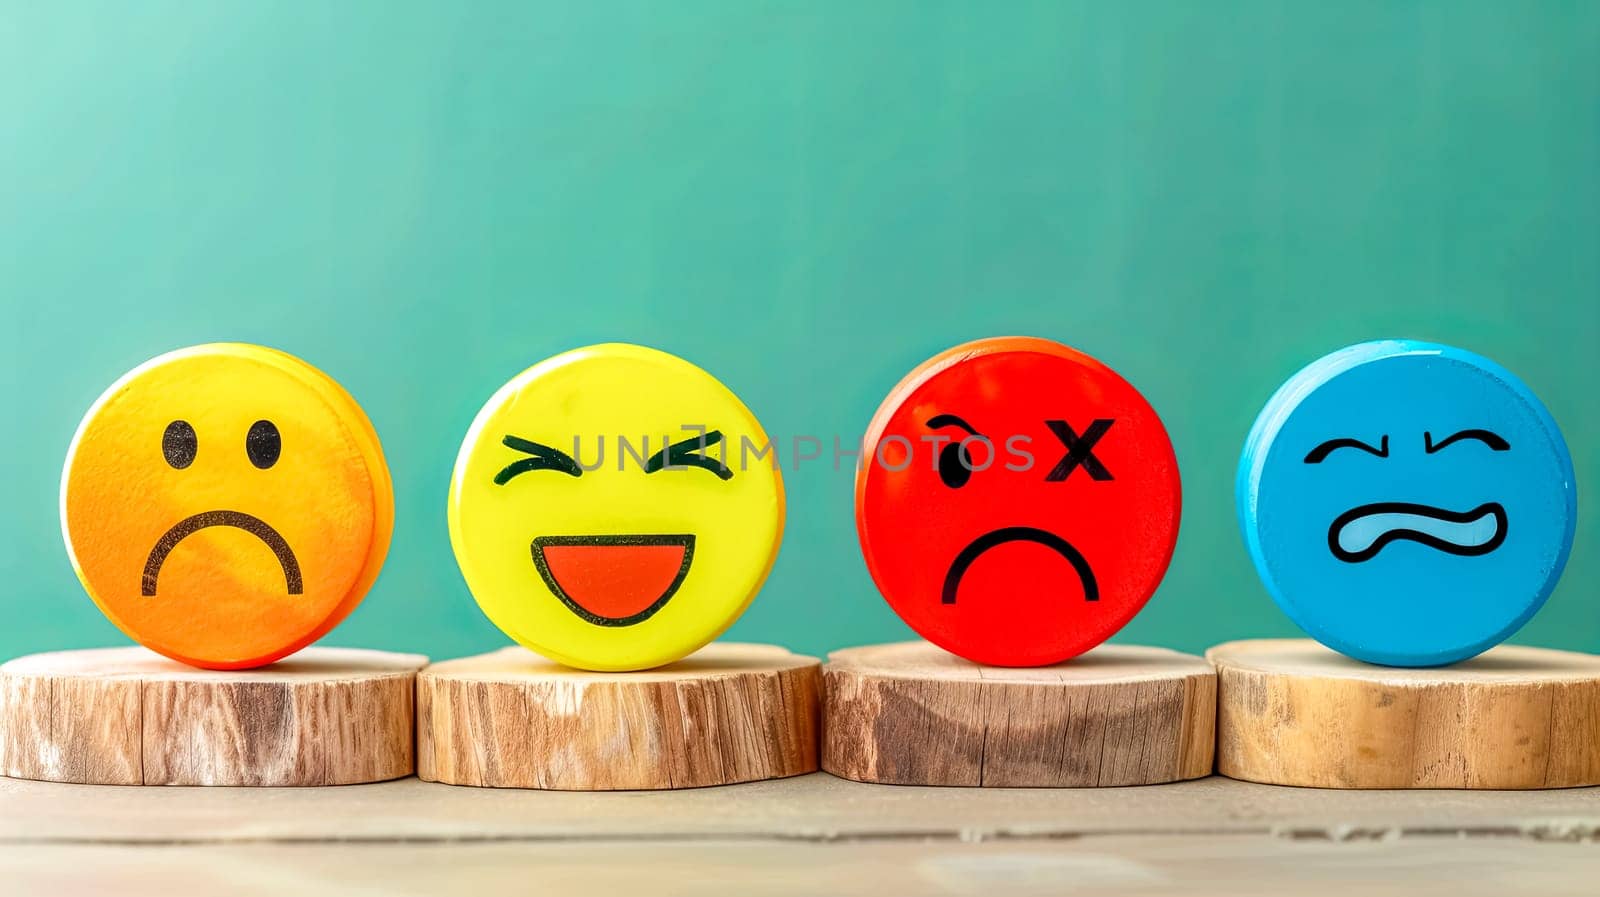 A row of wooden blocks featuring various facial expressions, including smiles, happy mouths, and emoticons.